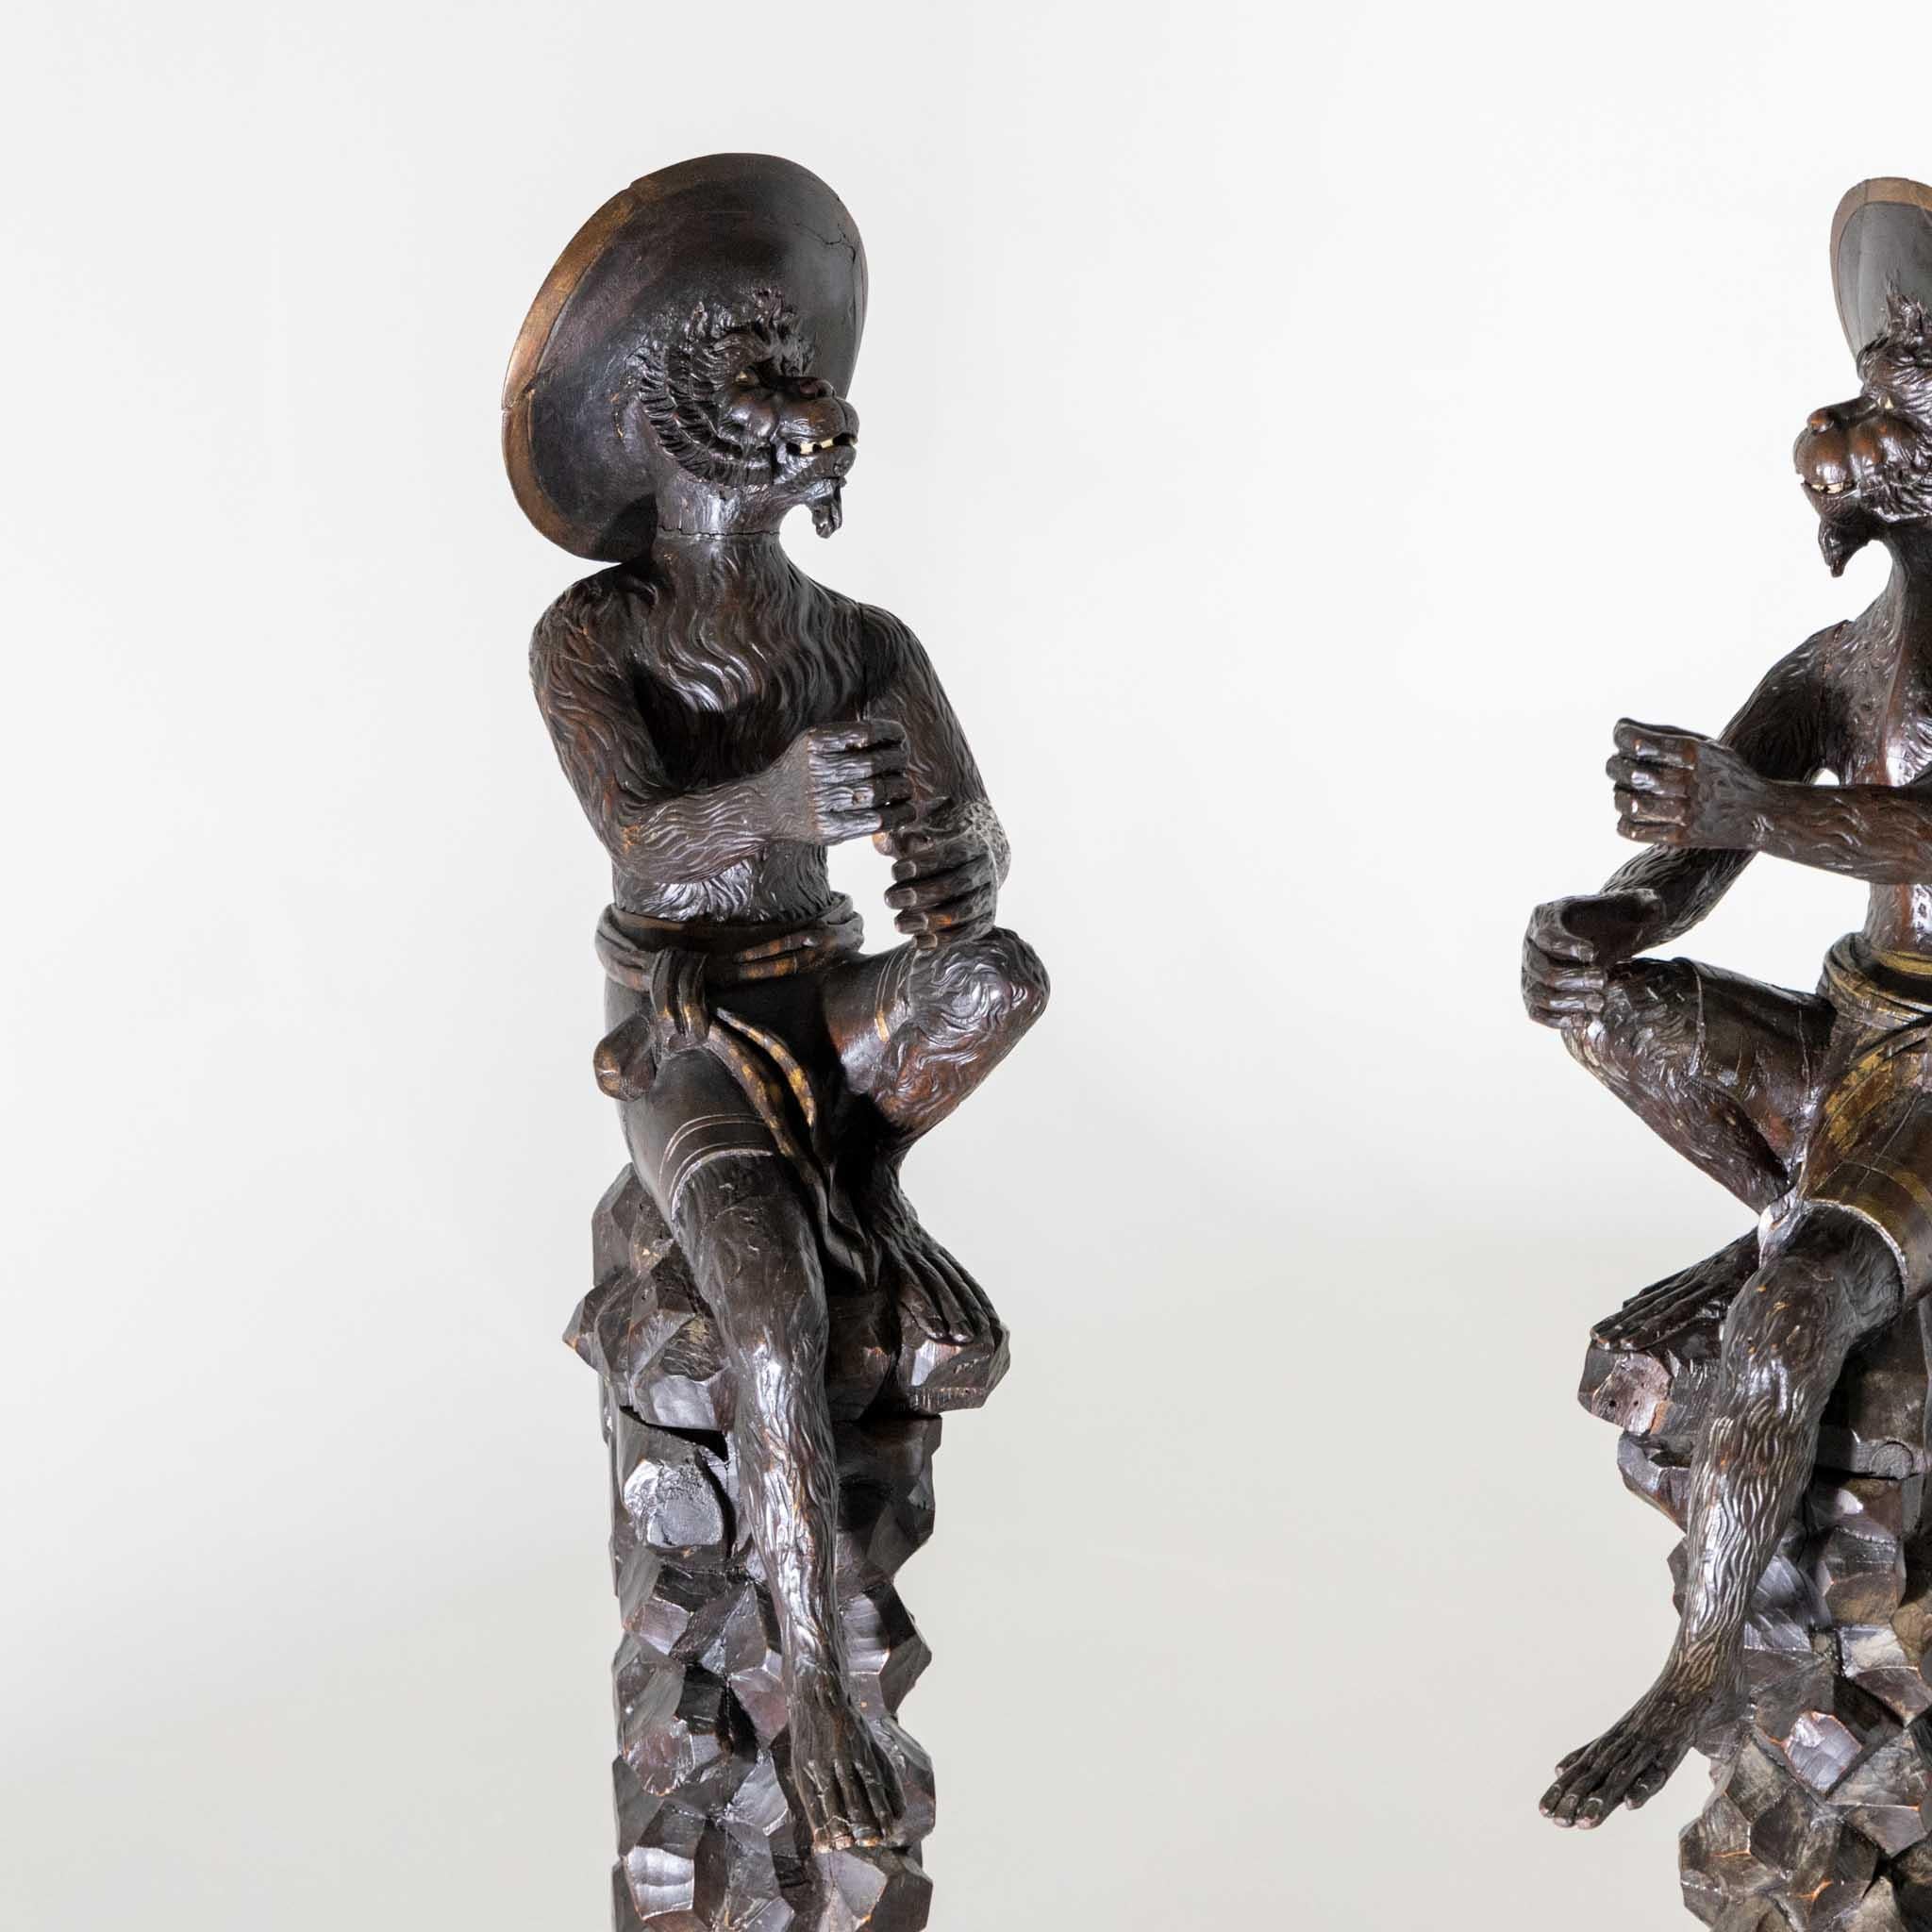 Pair of monkey figures carved from walnut as torchbearers. The monkeys in Venetian costume are sitting on high stylised rocks and are designed in the same way.